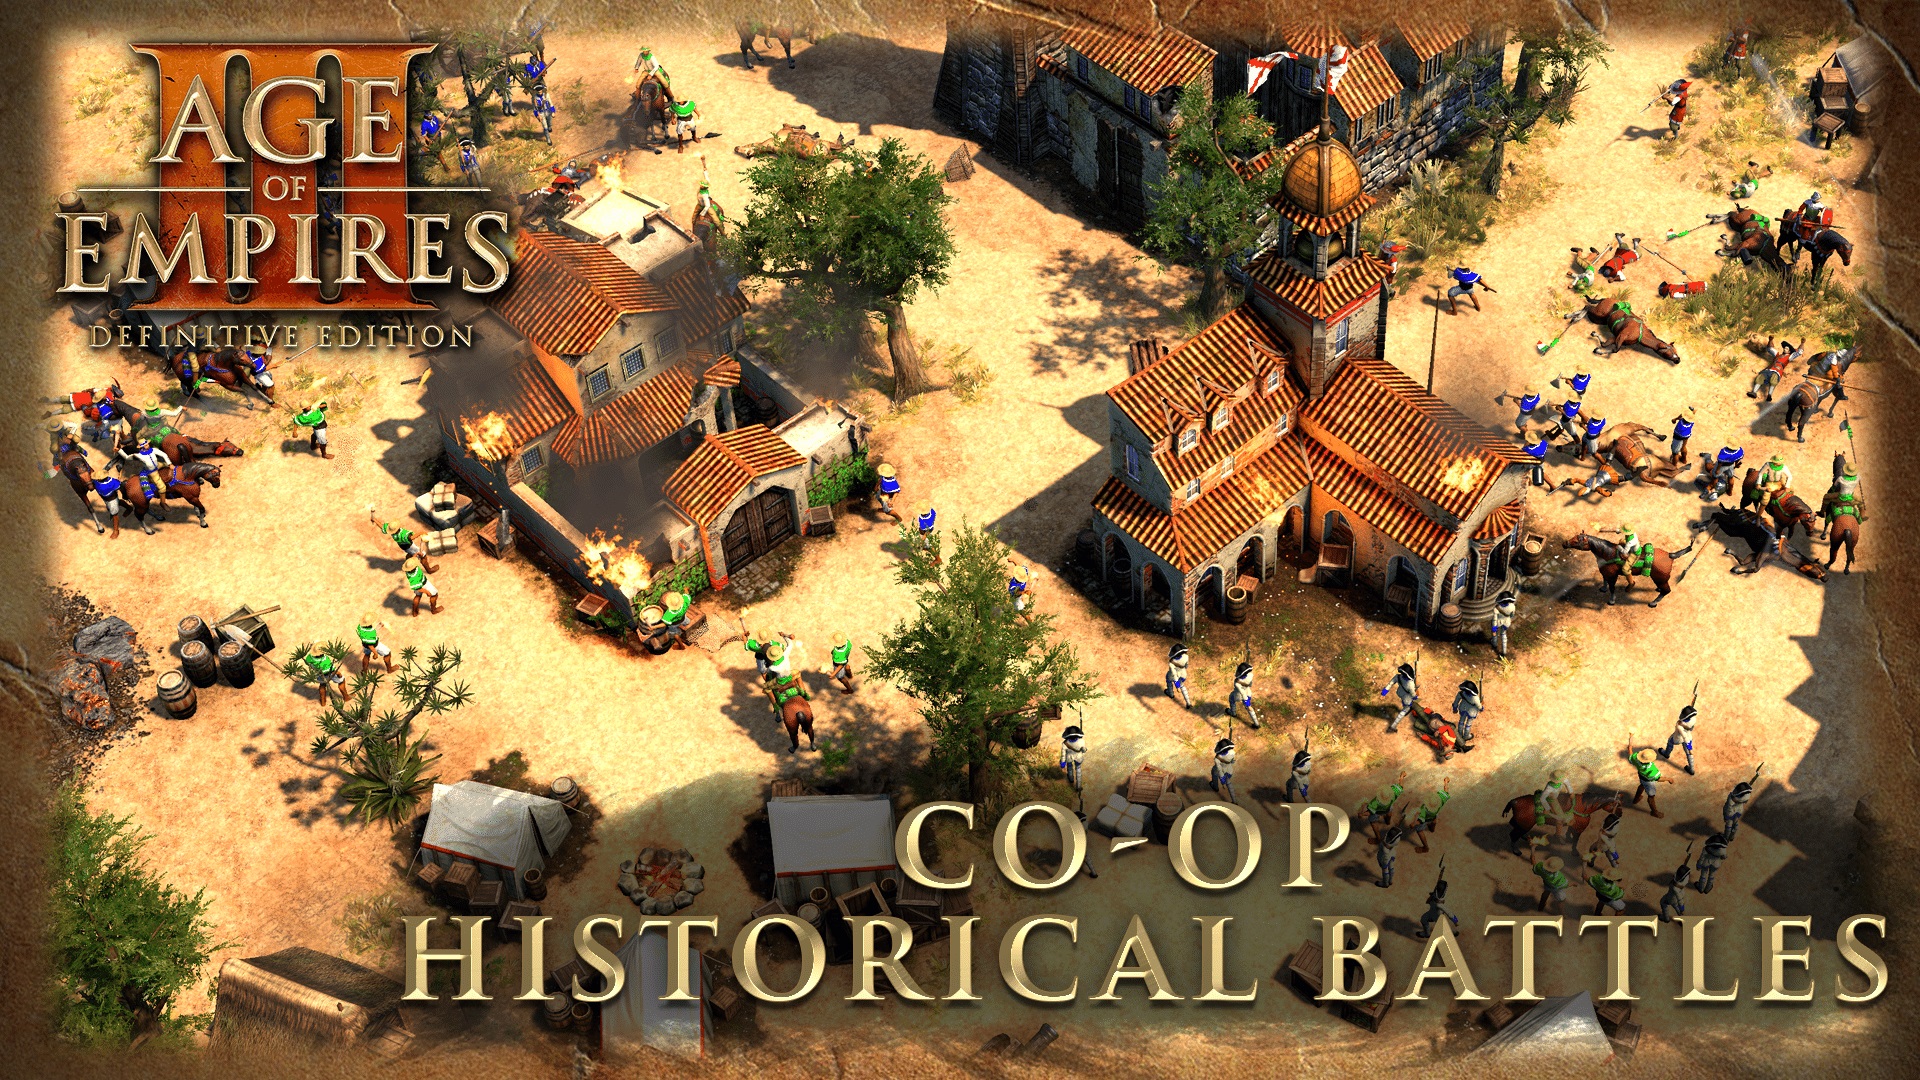 Age of Empires III: Definitive Edition gets co-op